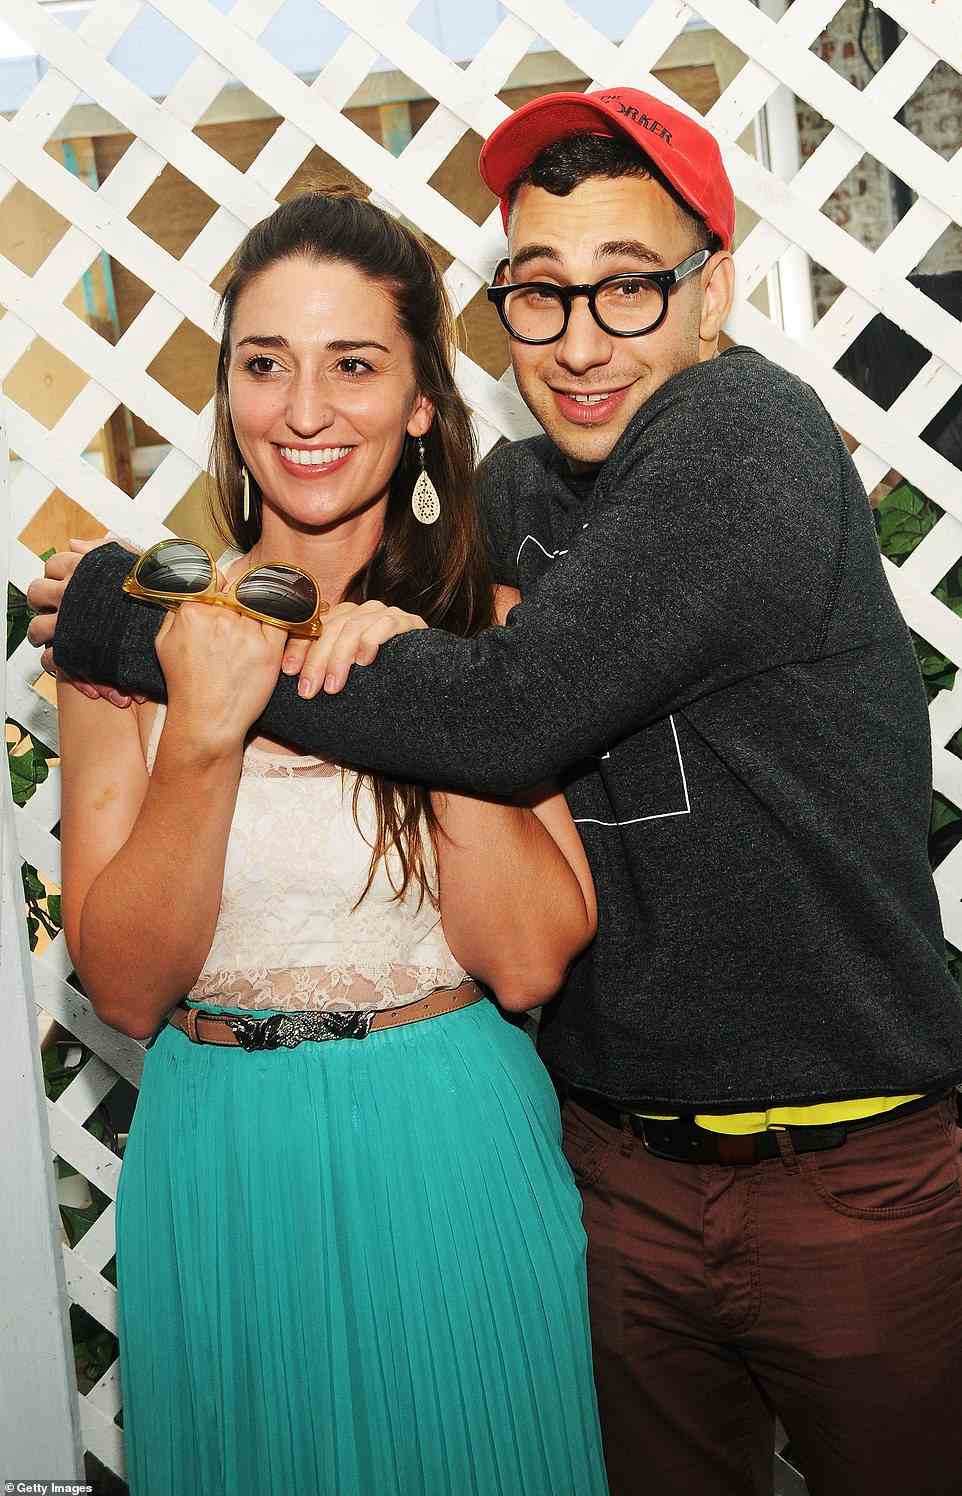 He also worked on the soundtrack for the romantic comedy Love, Simon, co-wrote Sara Bareilles' hit single Brave in 2013, and contributed to the production of P!nk's seventh album, Beautiful Trauma. He is pictured with Sara in 2012